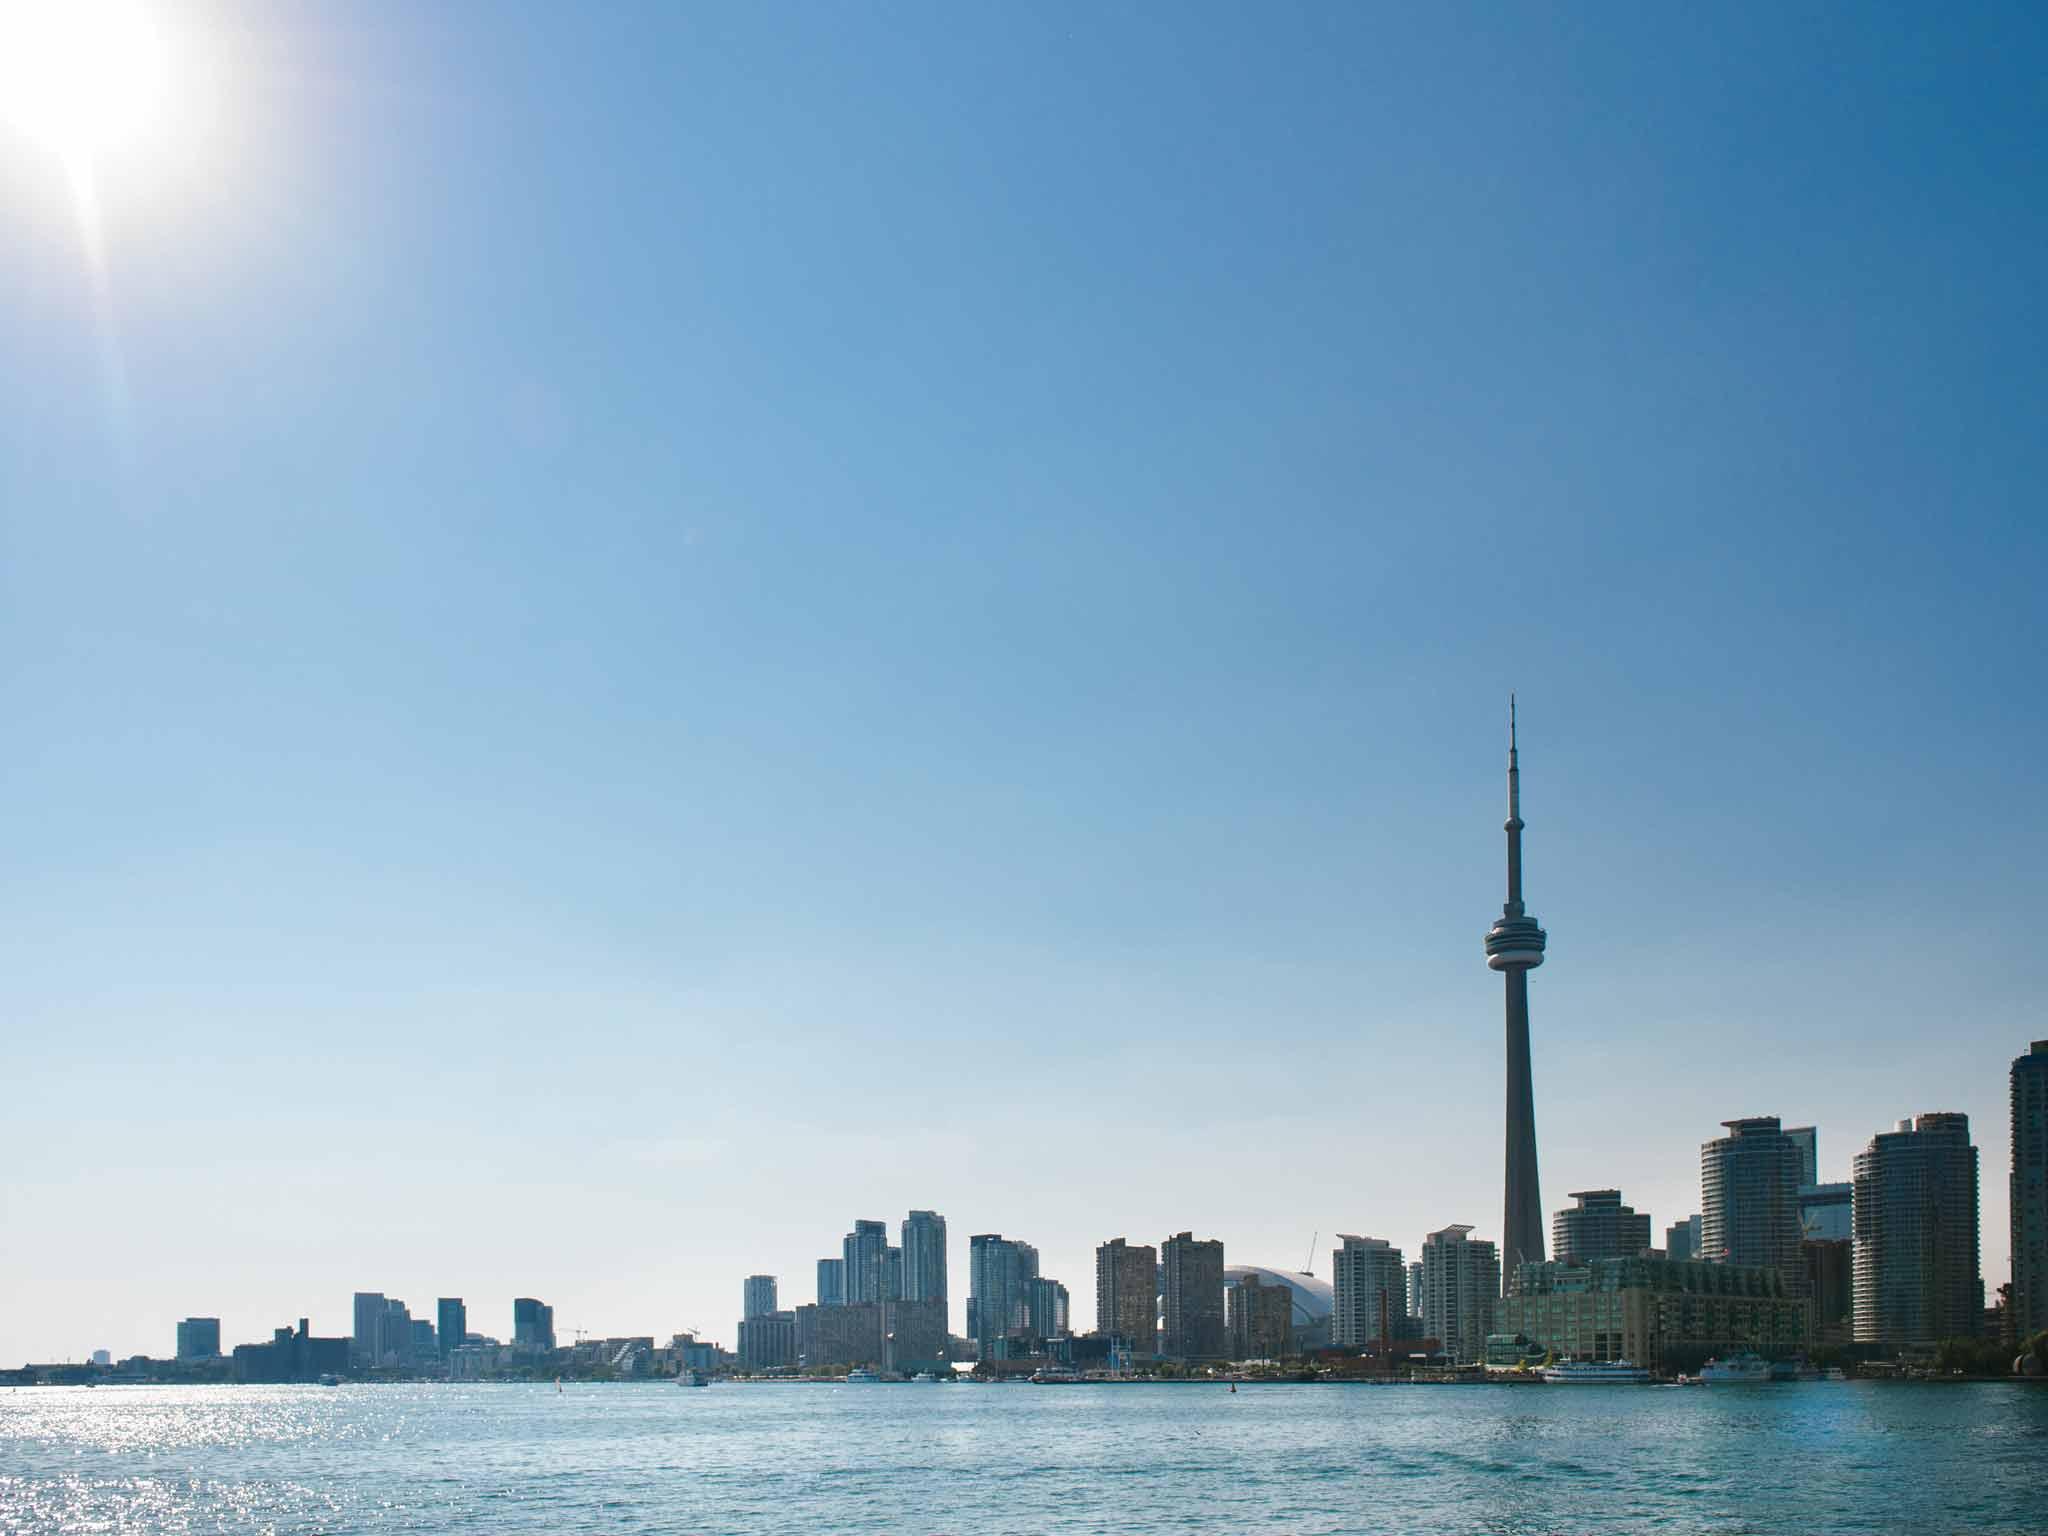 Toronto travel tips: Where to go and what to see in 48 hours